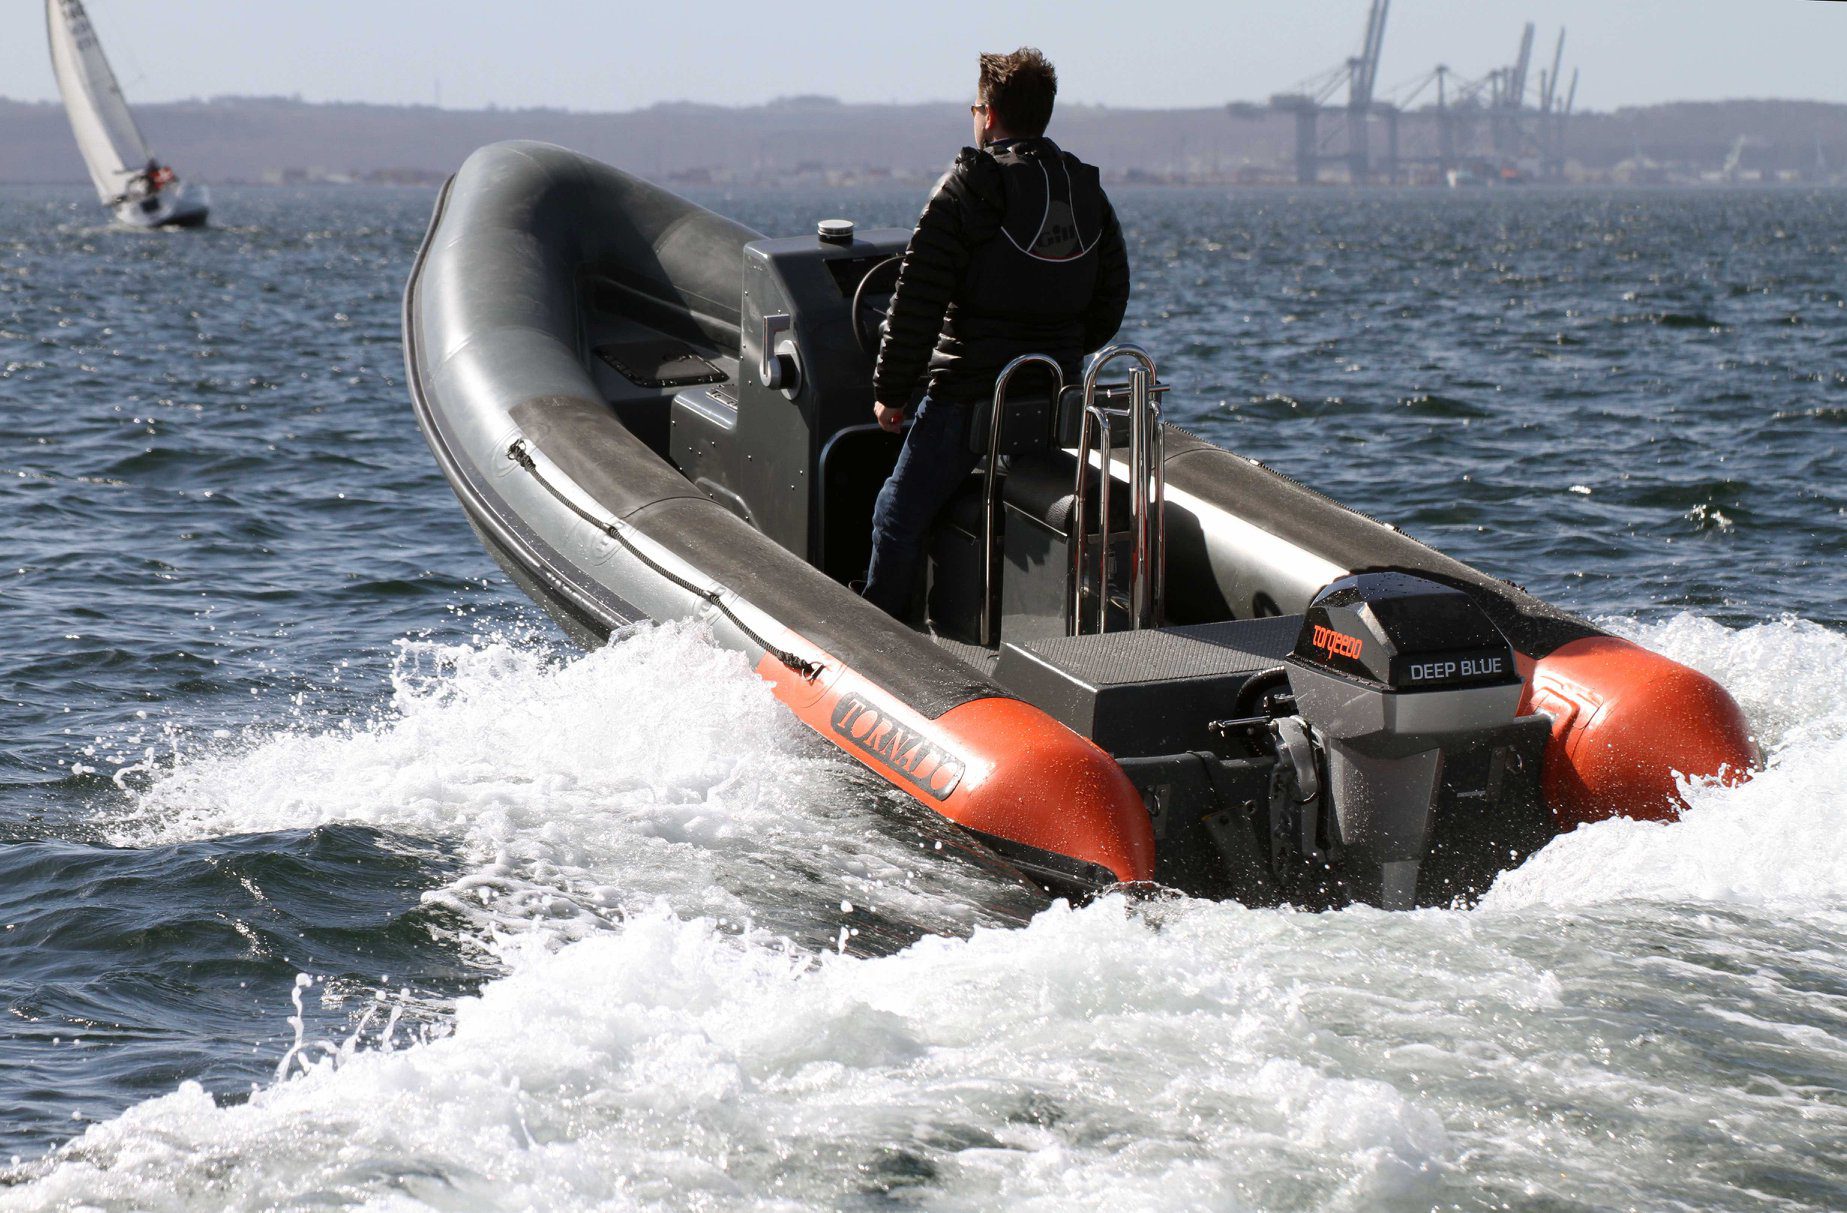 Grondwet Nathaniel Ward Verrast zijn RIBs (Rigid Inflatable Boats) with electric motors - how good do they work?